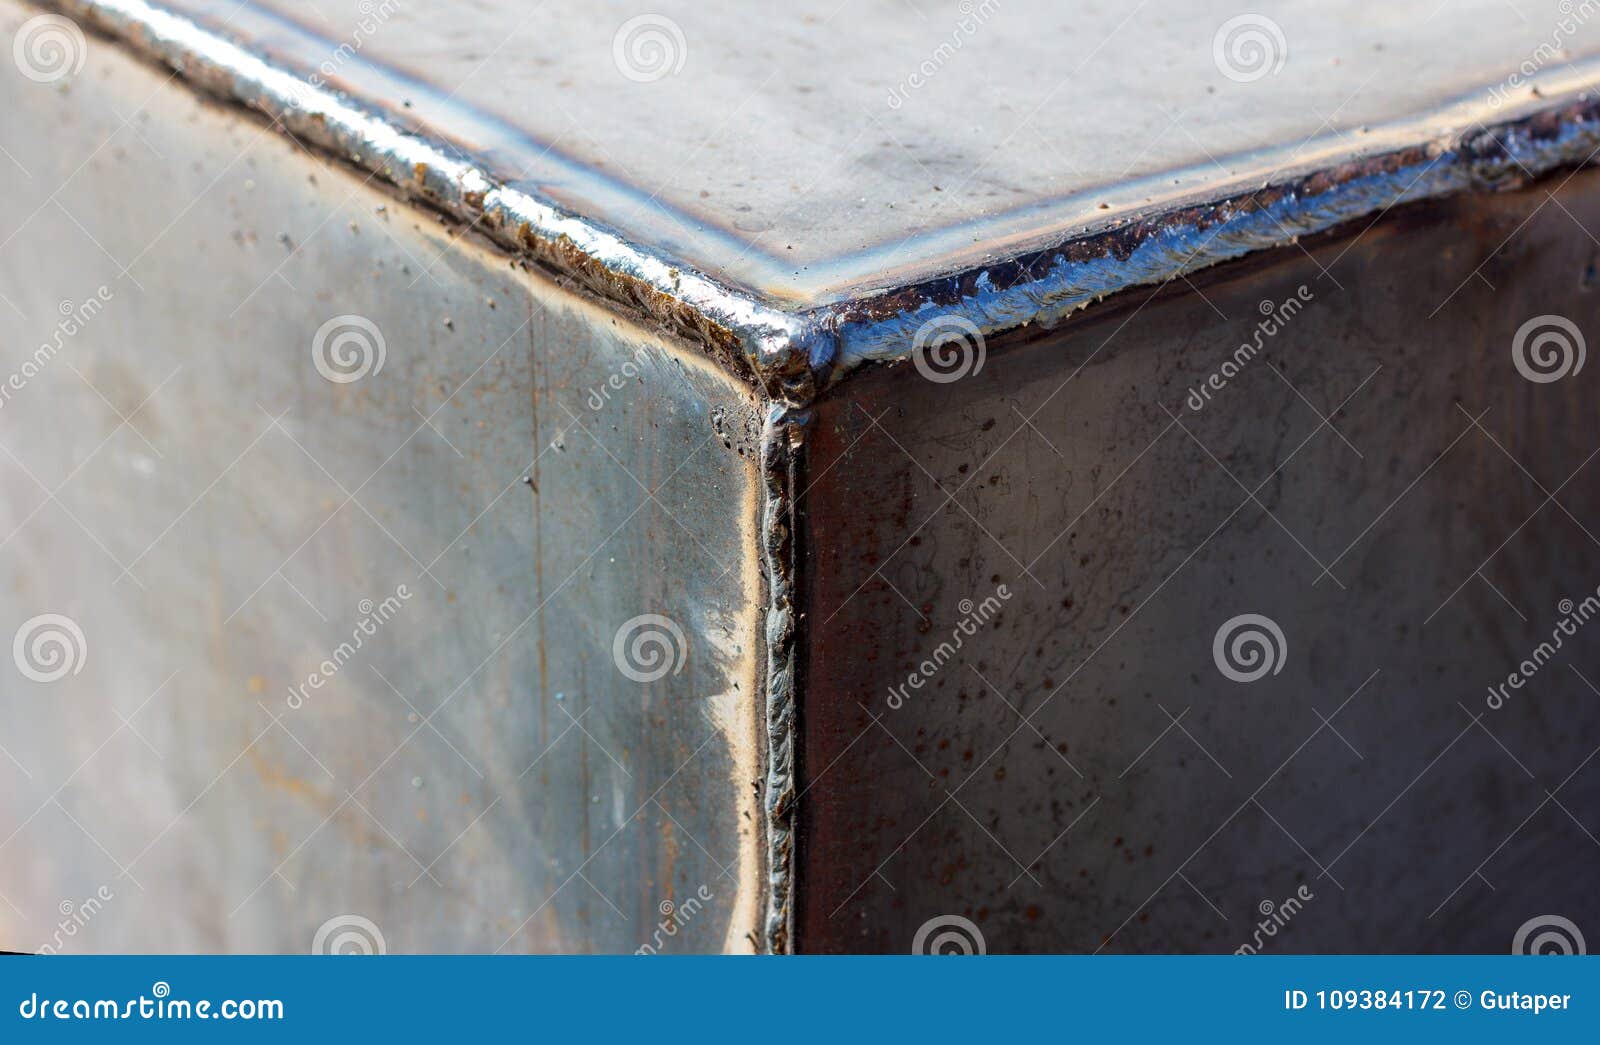 Texture Welding Seam on Steel Sheets Stock Photo - Image of protection,  industrial: 109384172